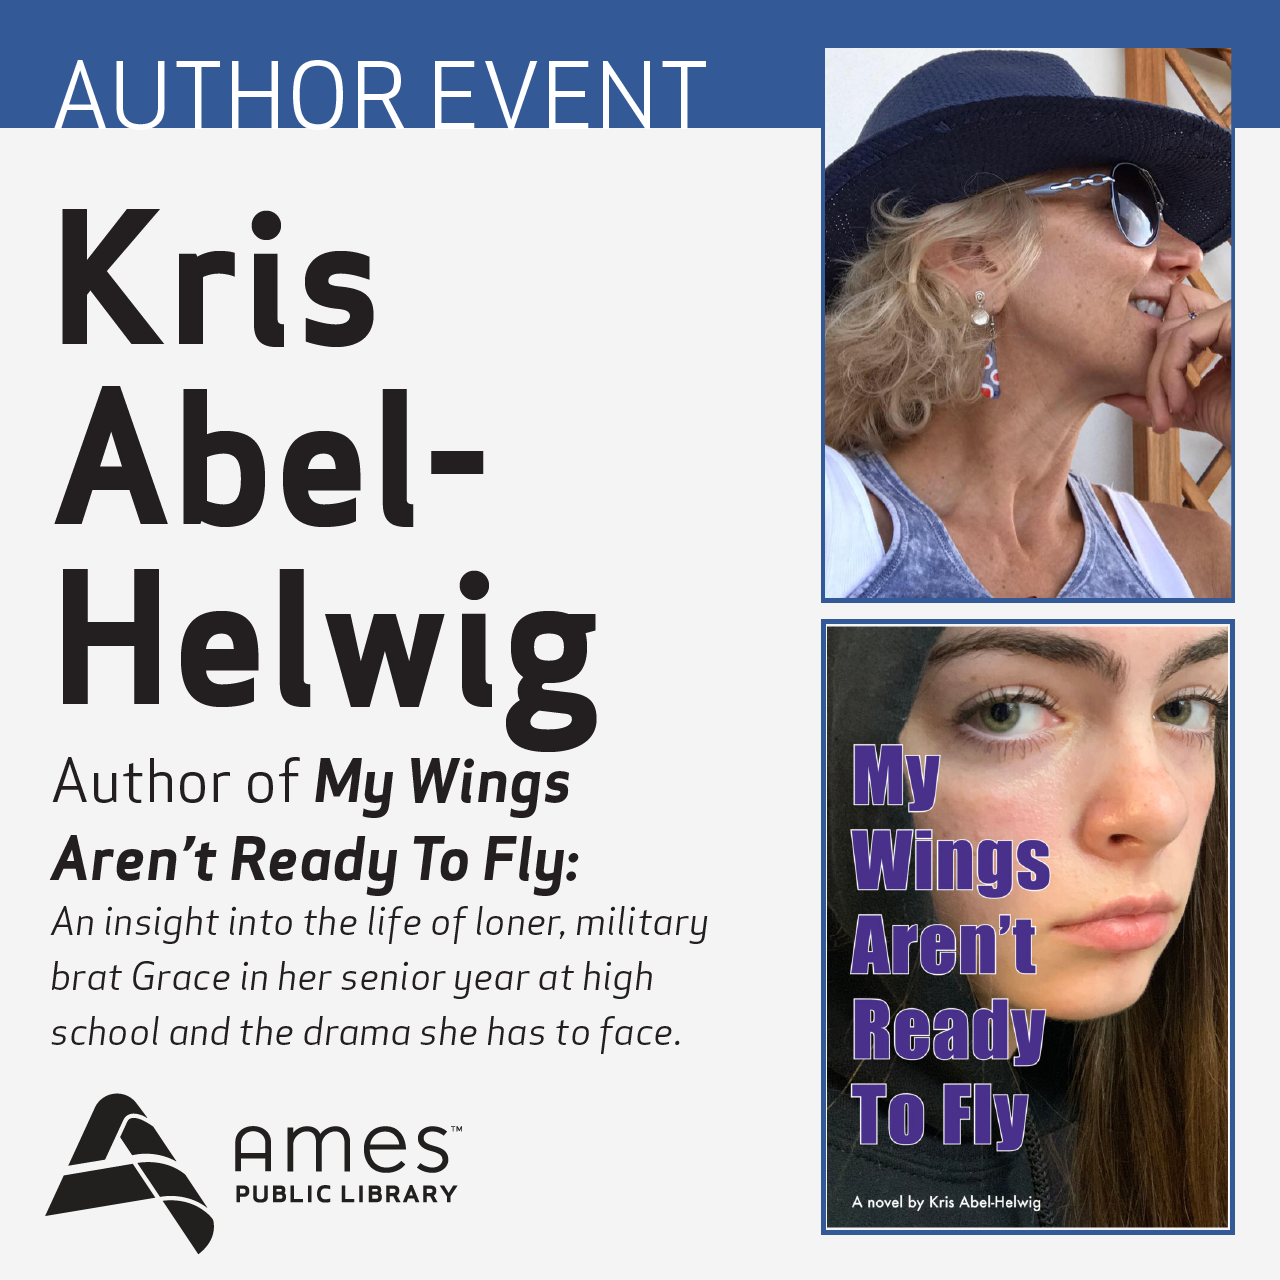 Author Event: Kris Abel-Helwig, author of "My Wings Aren't Ready To Fly"